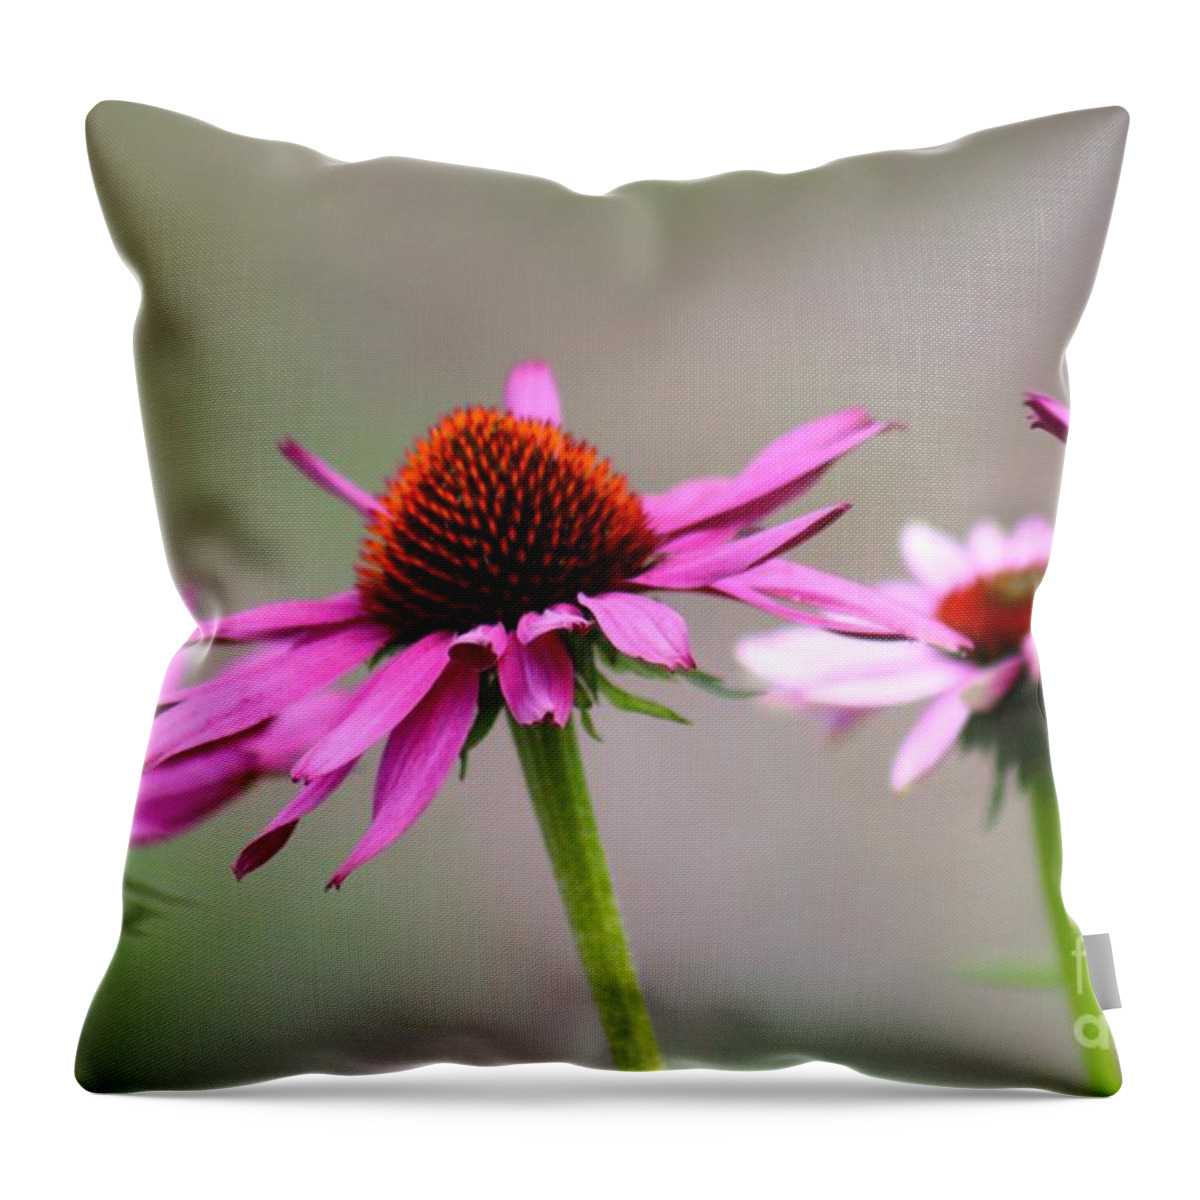 Pink Throw Pillow featuring the photograph Nature's Beauty 81 by Deena Withycombe